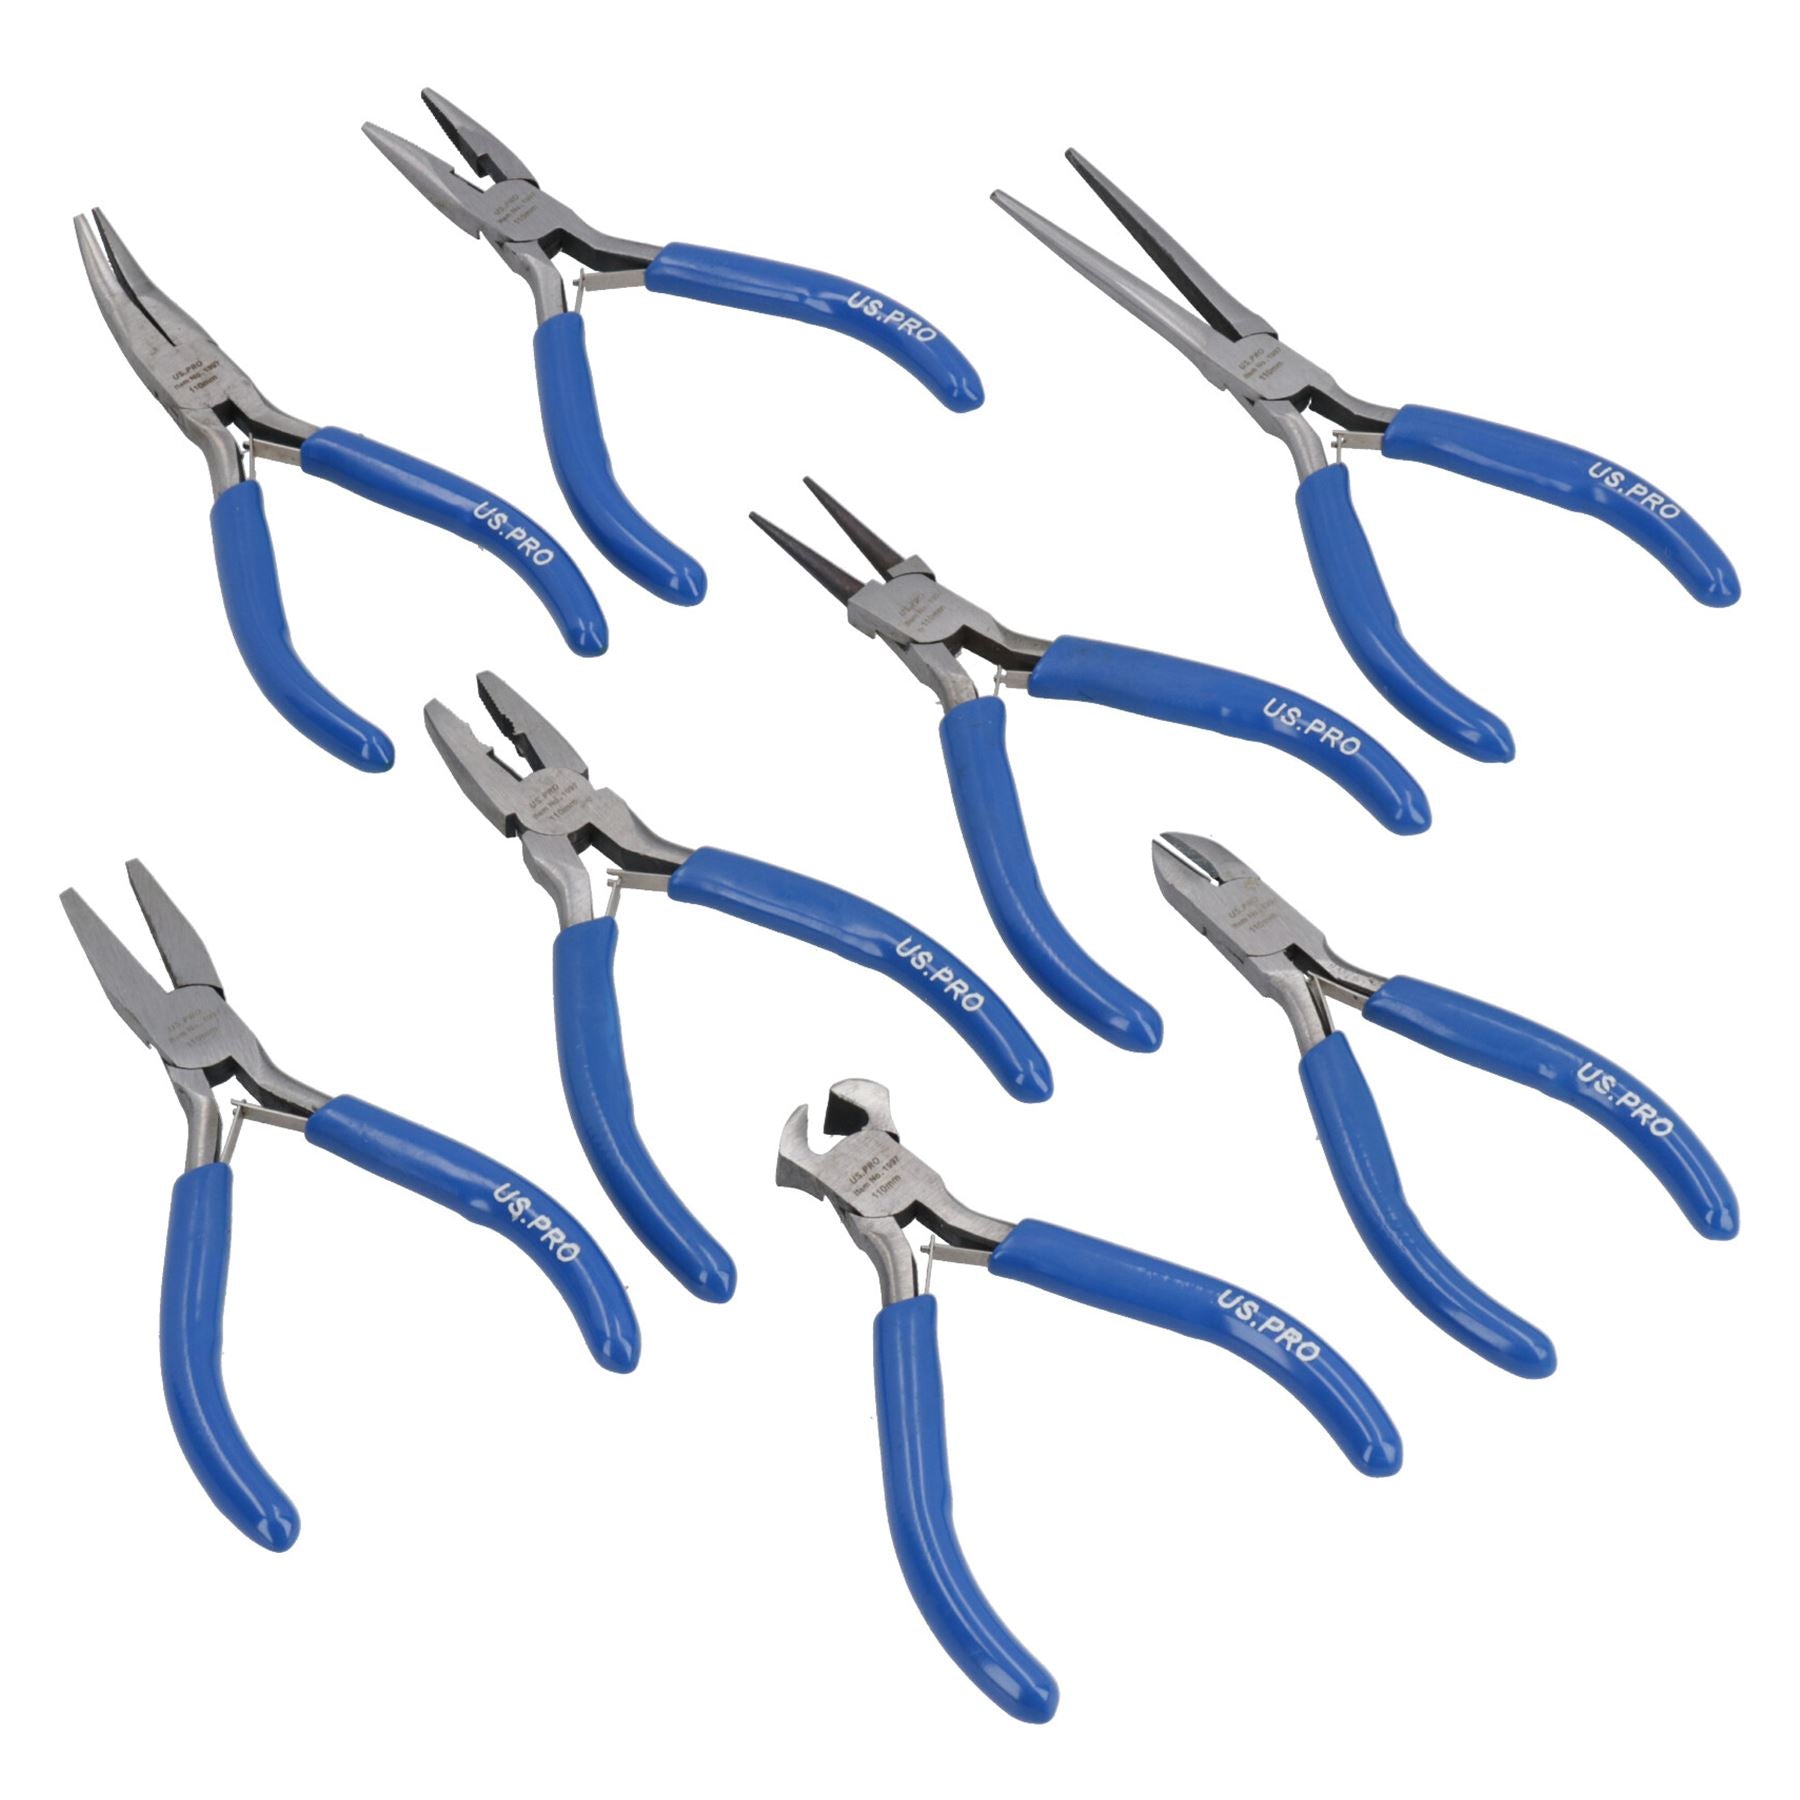 Mini Plier Set Craft Jewellery Making Cutters Long Nose Circlips Engineers 8pc Set